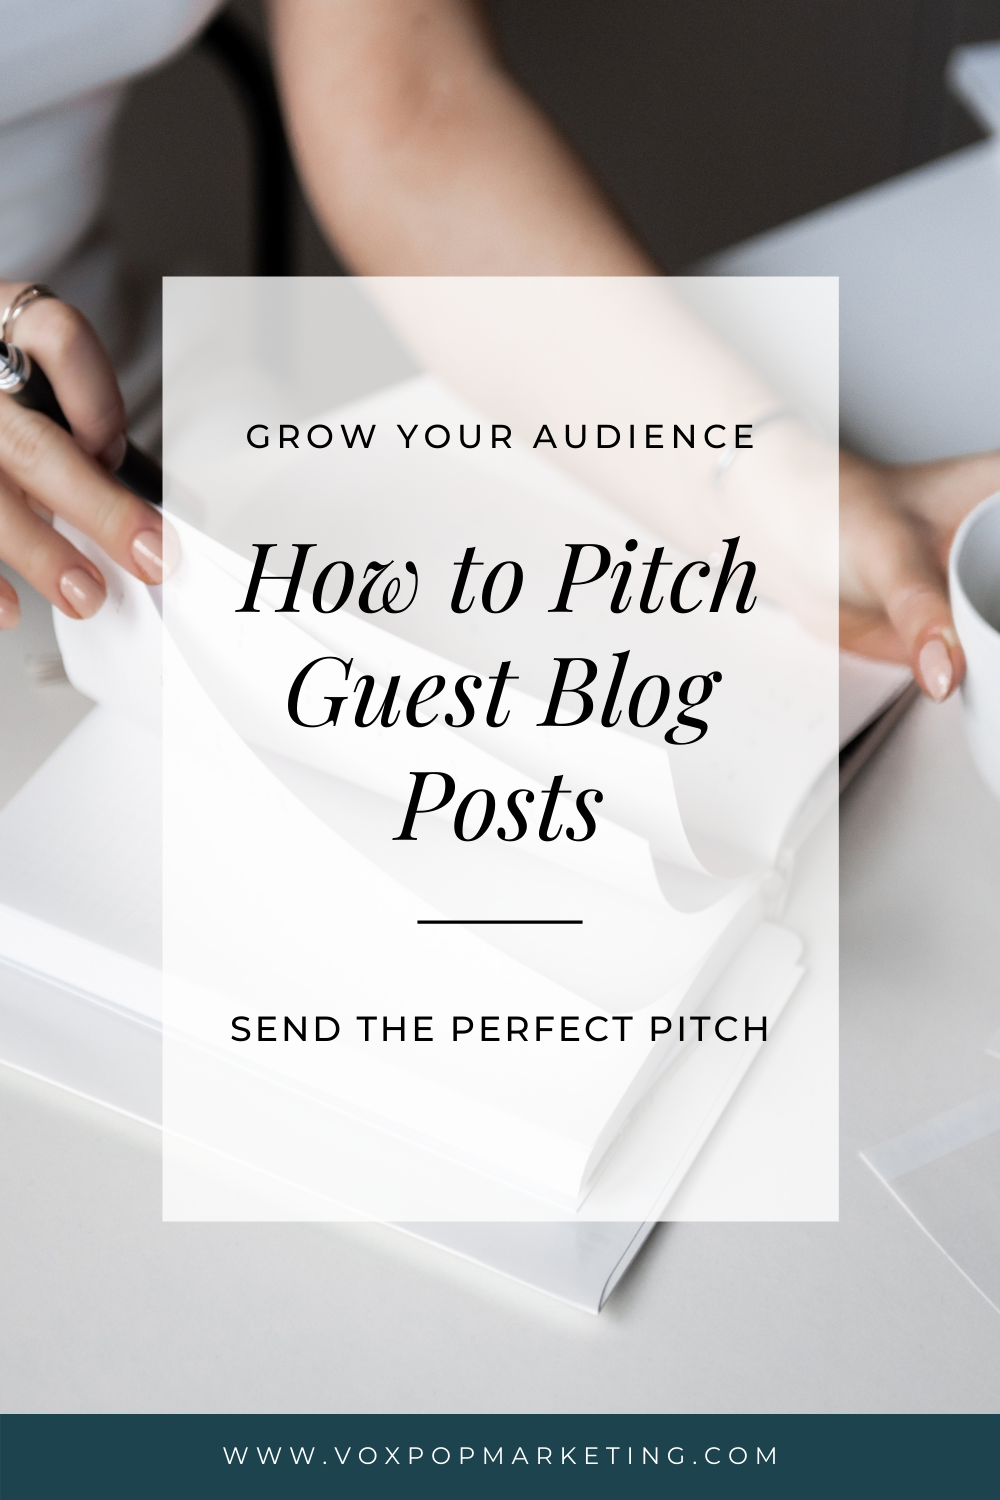 How to Send a Winning Guest Blog Post Pitch Pitch to Grow Your Audience